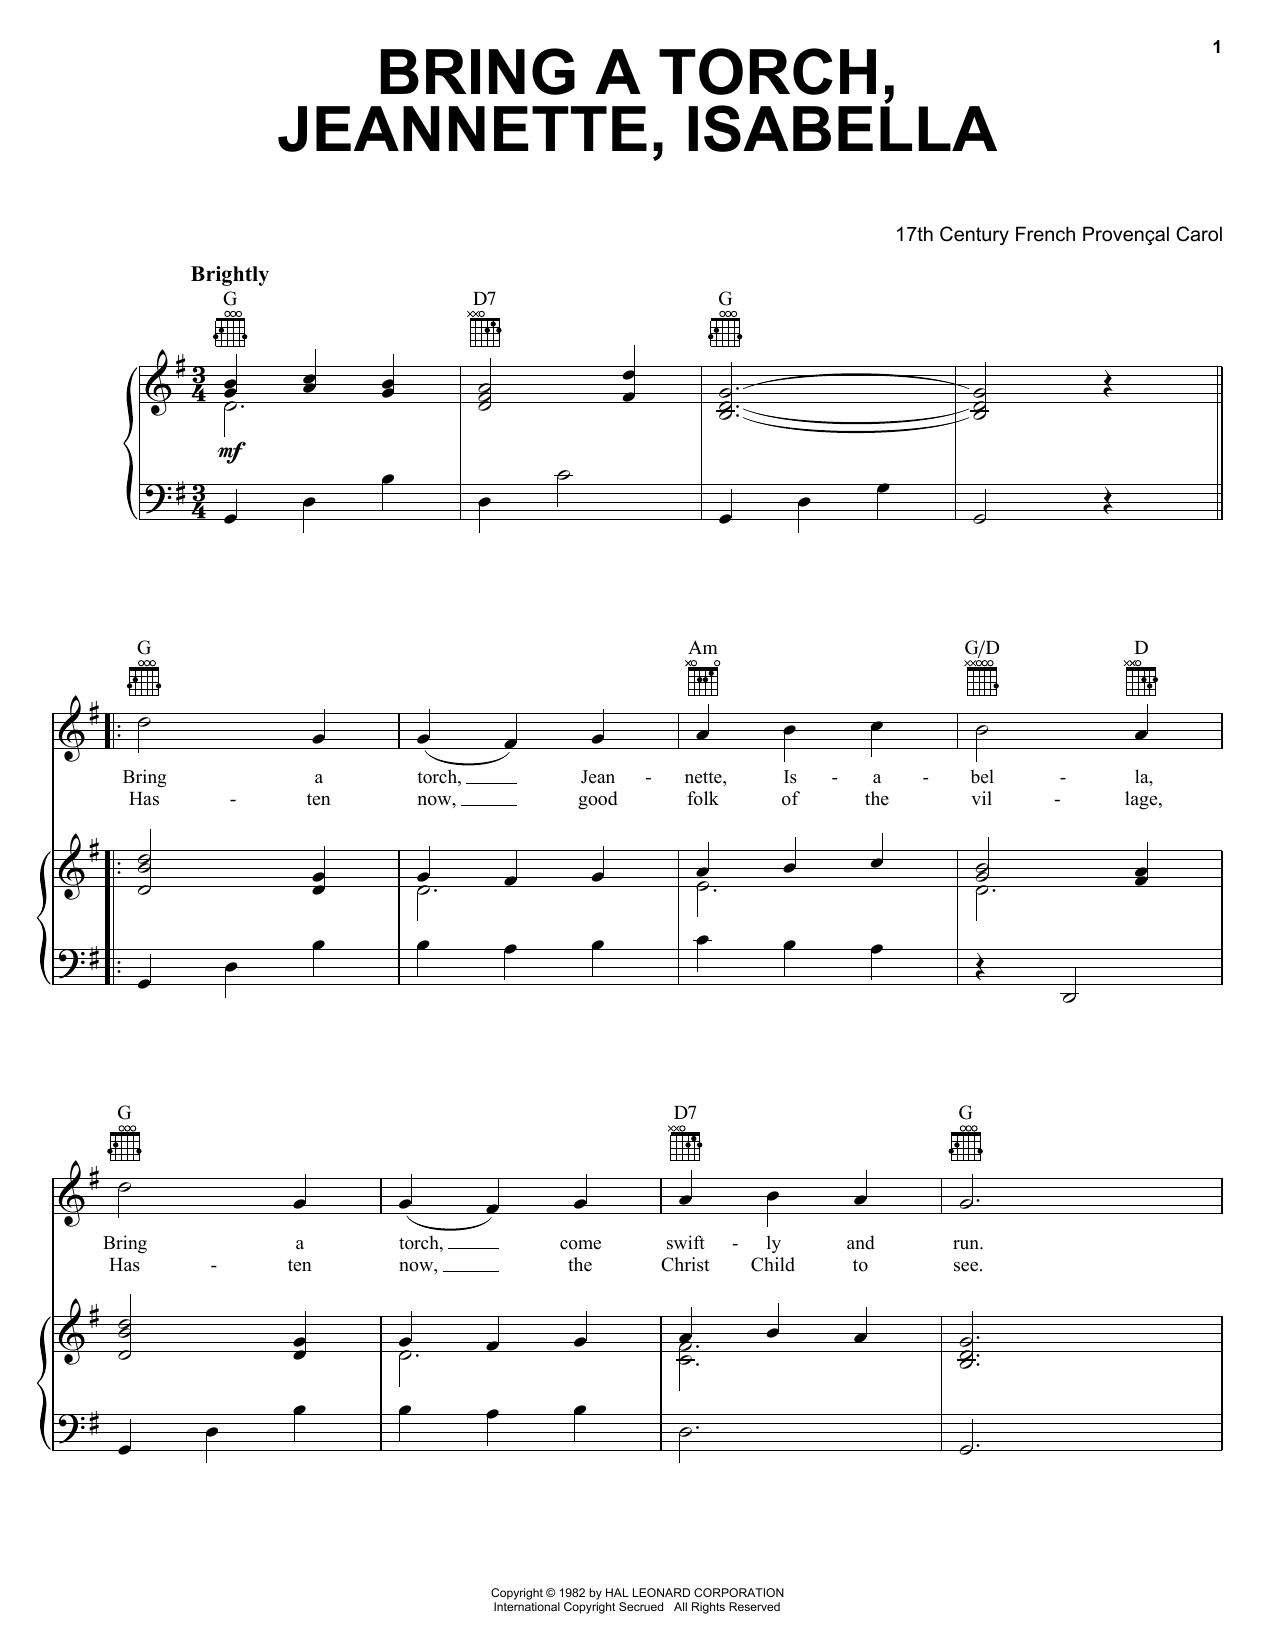 17th Century French Carol Bring A Torch, Jeannette Isabella sheet music notes and chords. Download Printable PDF.